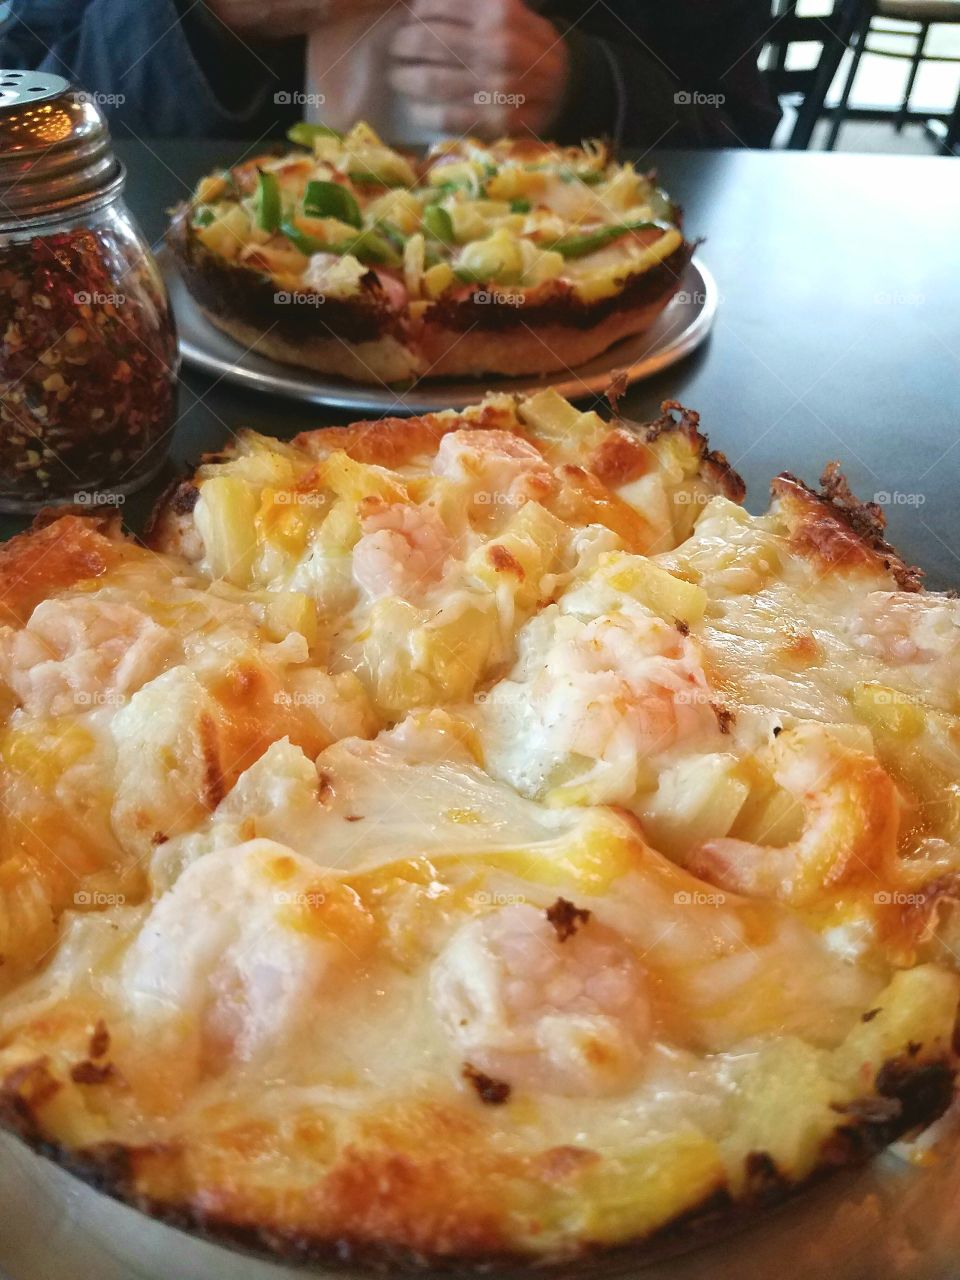 shrimp and pineapple 
pizza